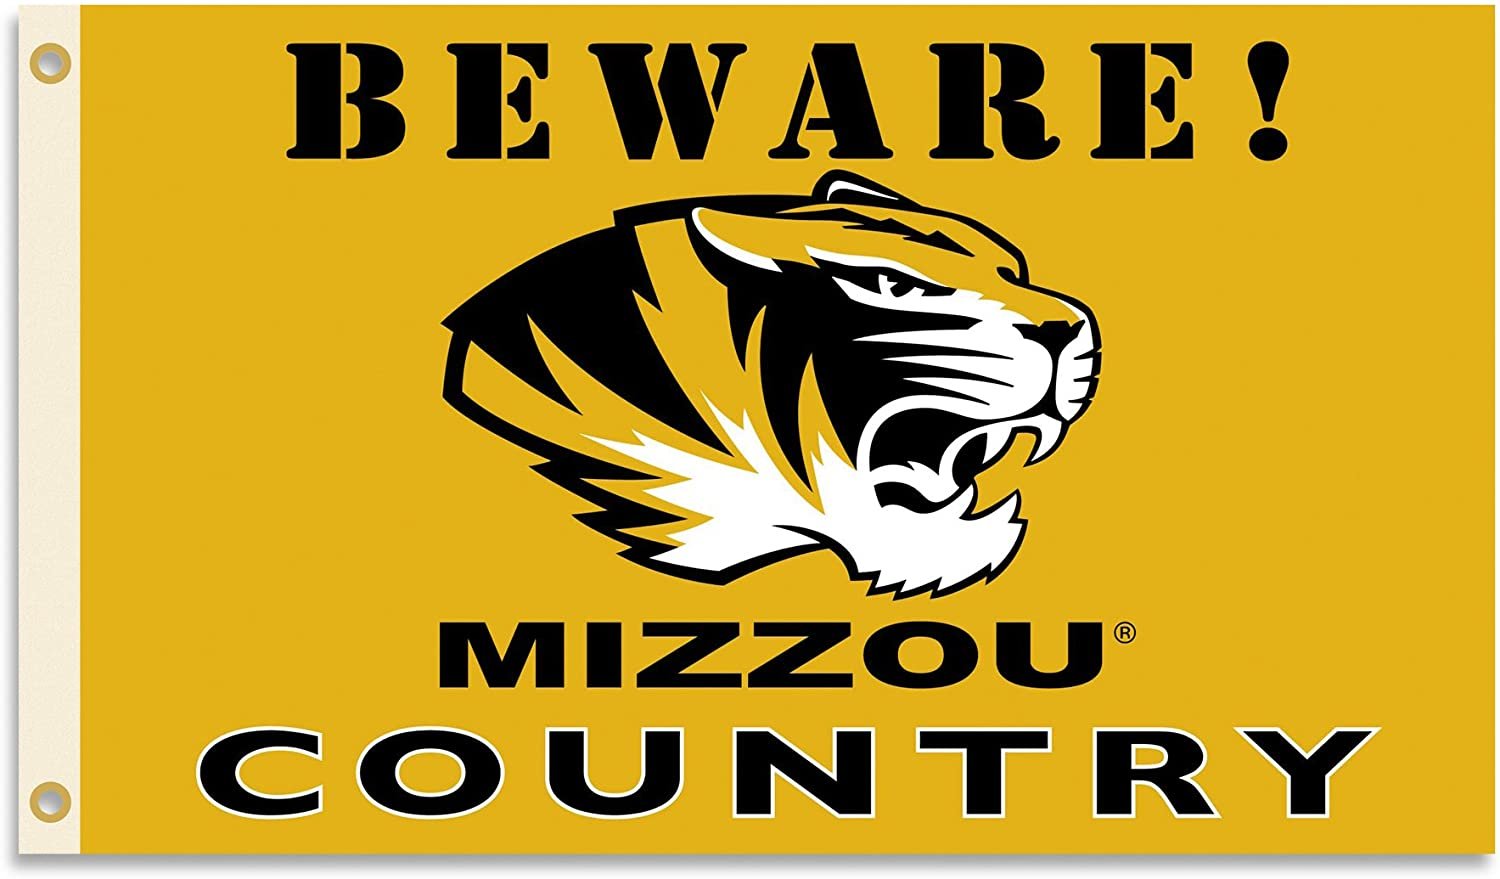 University of Missouri Tigers Premium 3x5 Feet Flag Banner, Beware Country Design, Metal Grommets, Outdoor Use, Single Sided